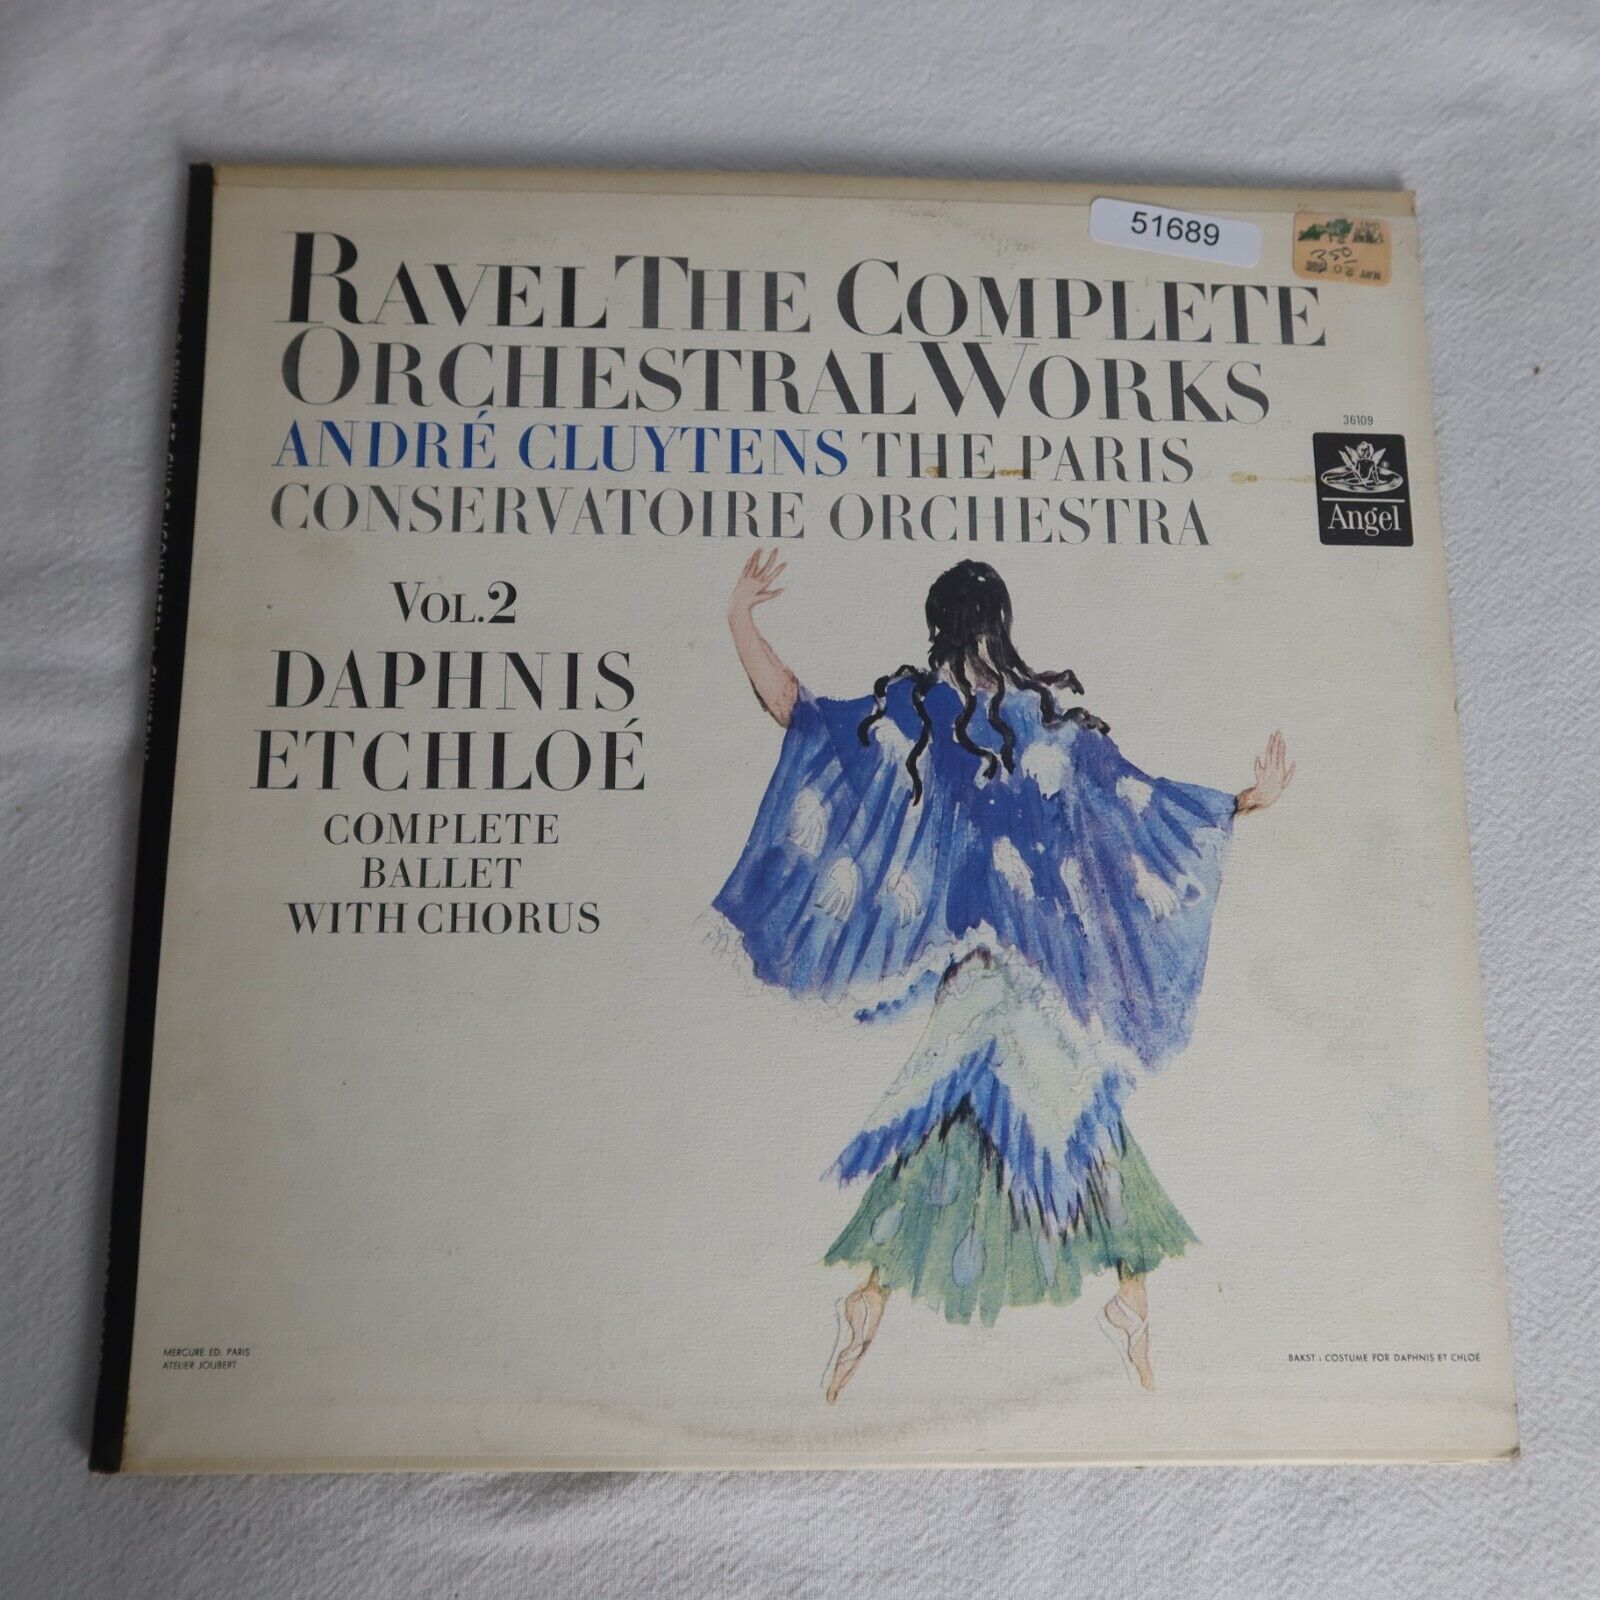 Andre Cluytens Ravel The Complete Orchestral Works LP Vinyl Record Album